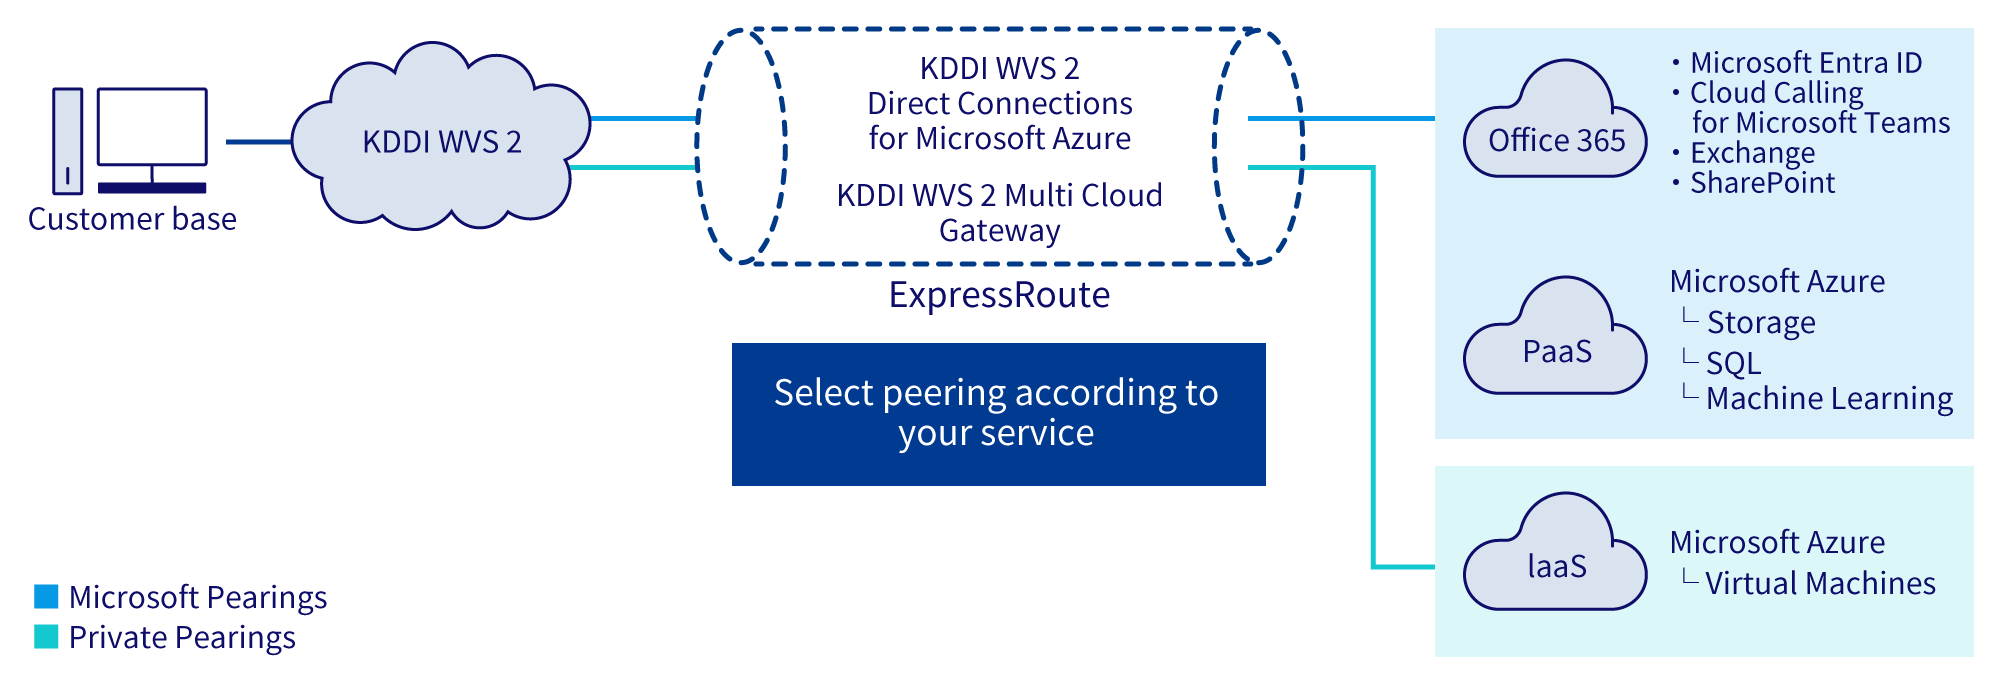 Connect to various cloud services through KDDI WVS 2 WVS2 direct connection for Microsoft Azure or KDDI WVS2 Murchi Cloud Gateway from a customer-based PC and ExpressRoute. Selectable depending on the peering service. Cloud services include Office 365 (Microsoft Entra ID, Cloud Calling for Microsoft Teams, Exchange, SharePoint), PaaS (Microsoft Azure Storage, SQL, Machine Learning), and laaS (Microsoft Azure Virtual Machines).